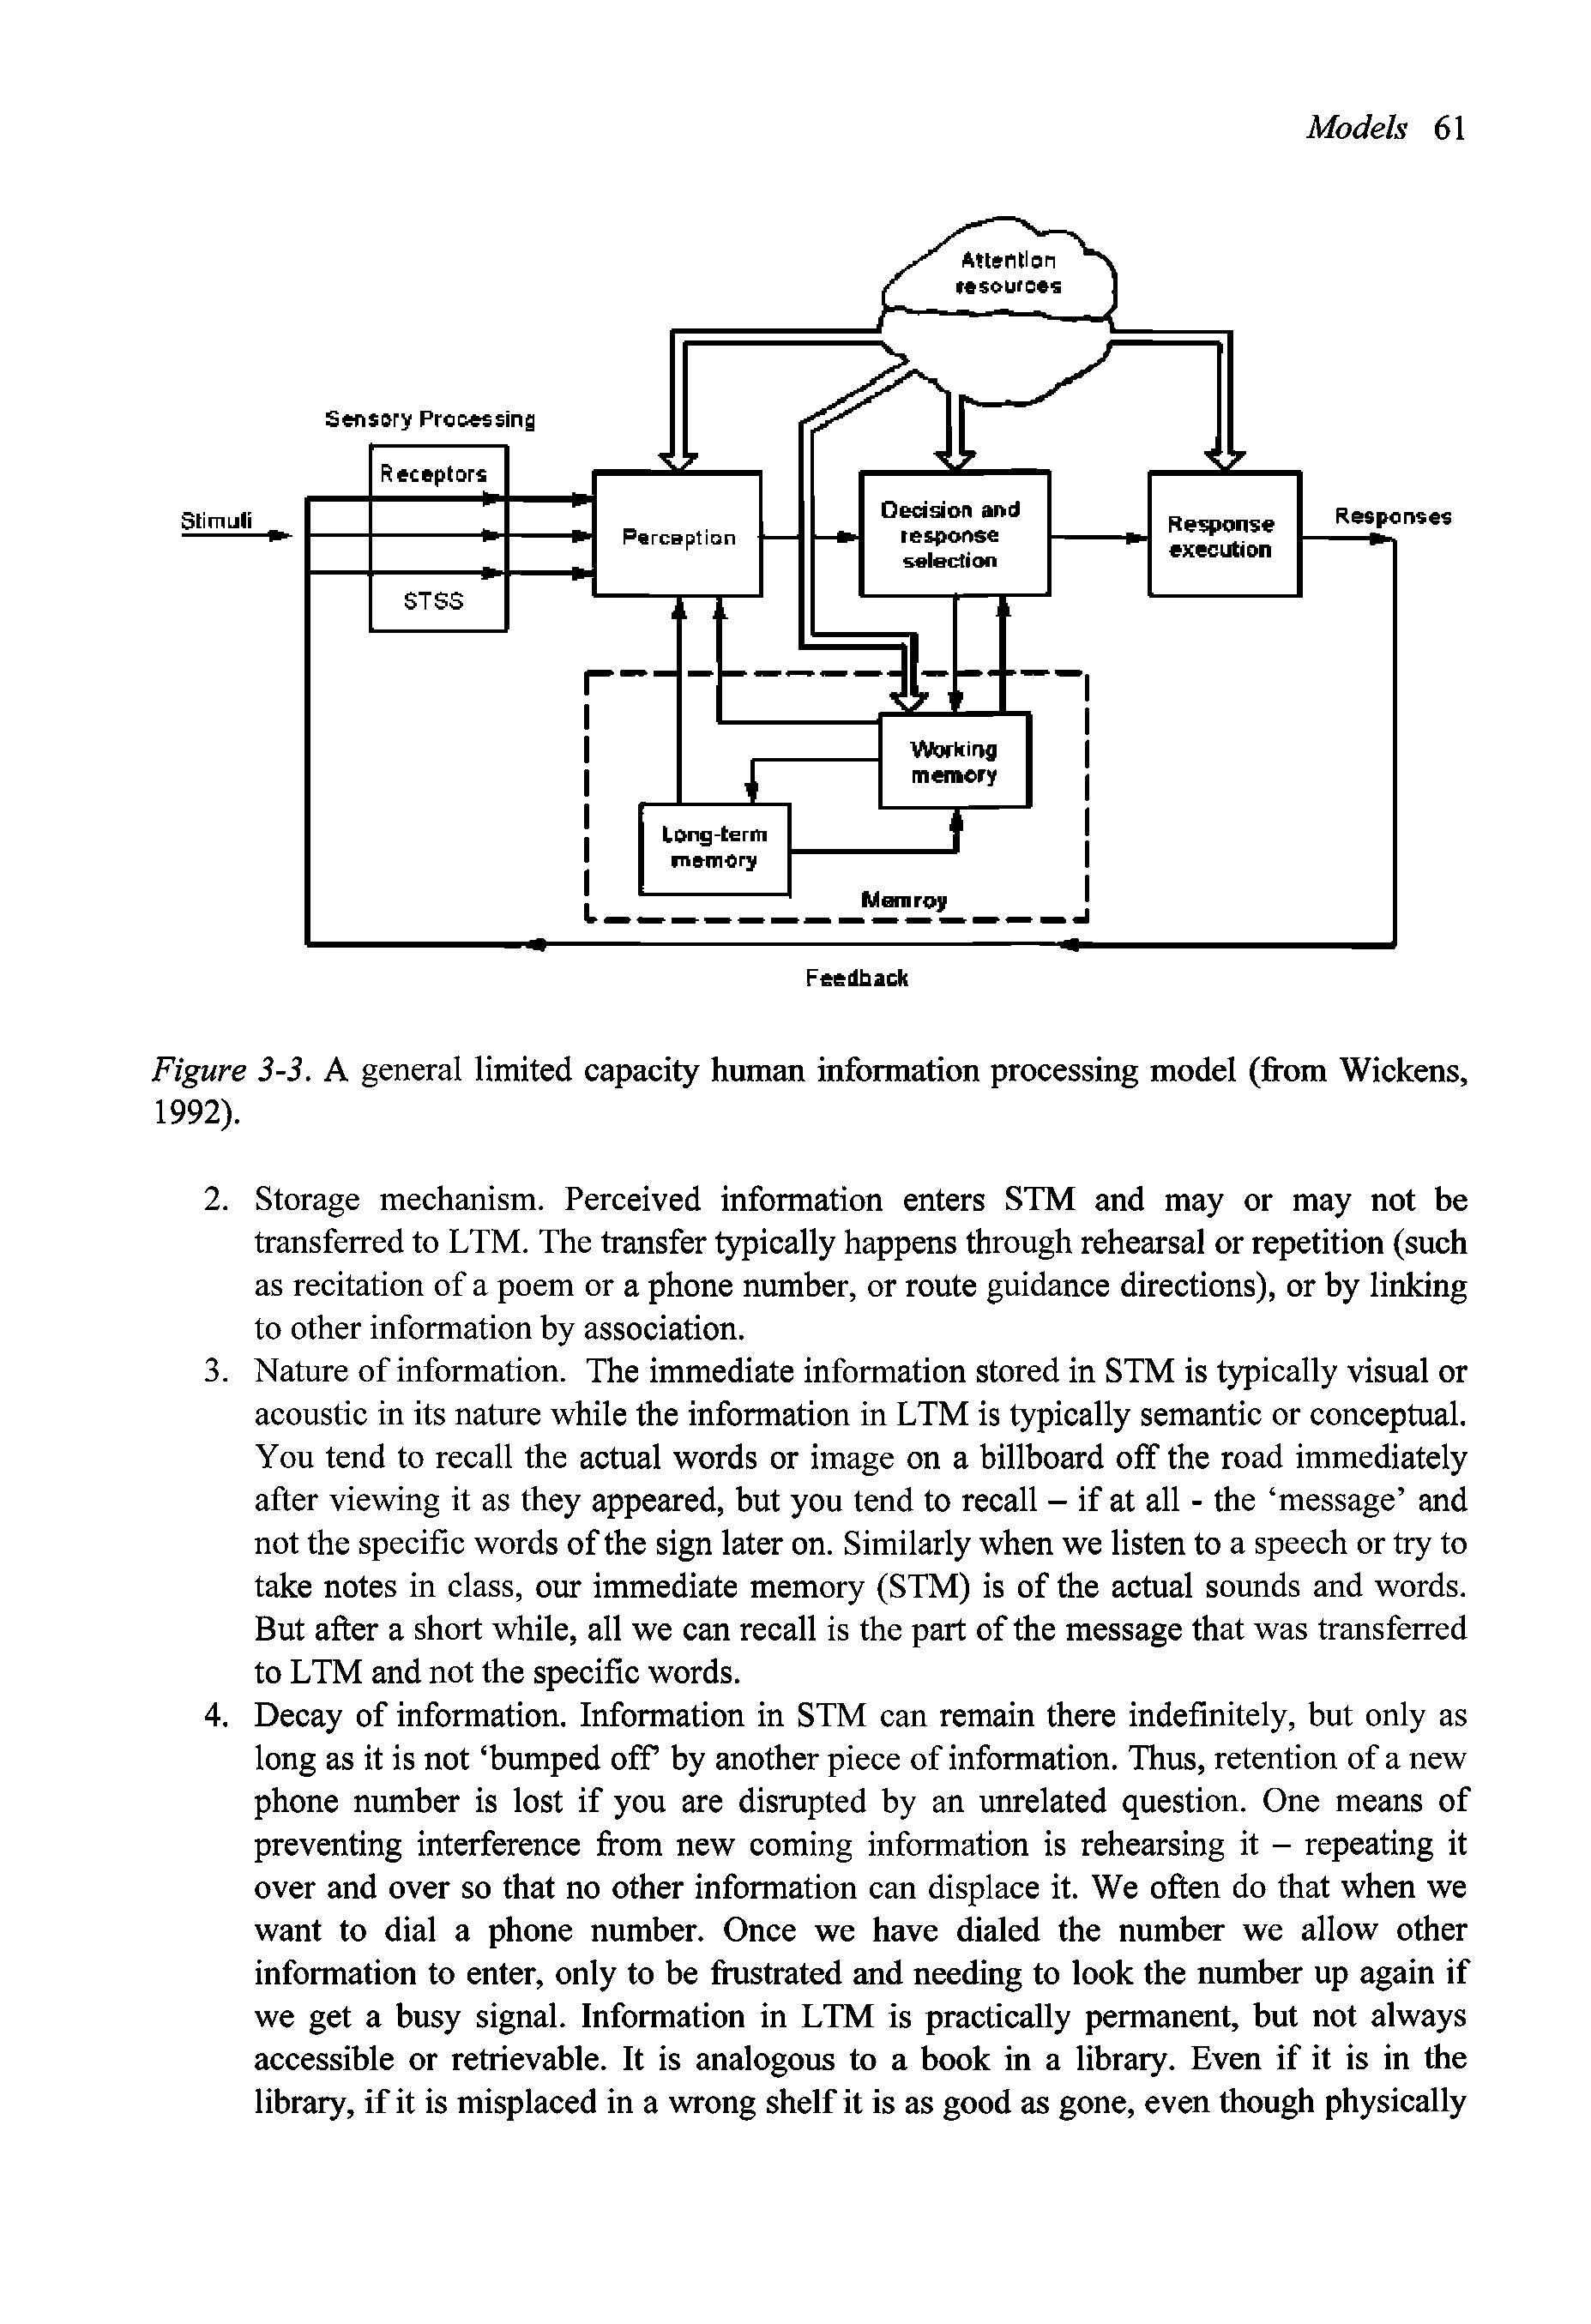 Figure 3-3, A general limited capacity human information processing model (from Wickens, 1992).